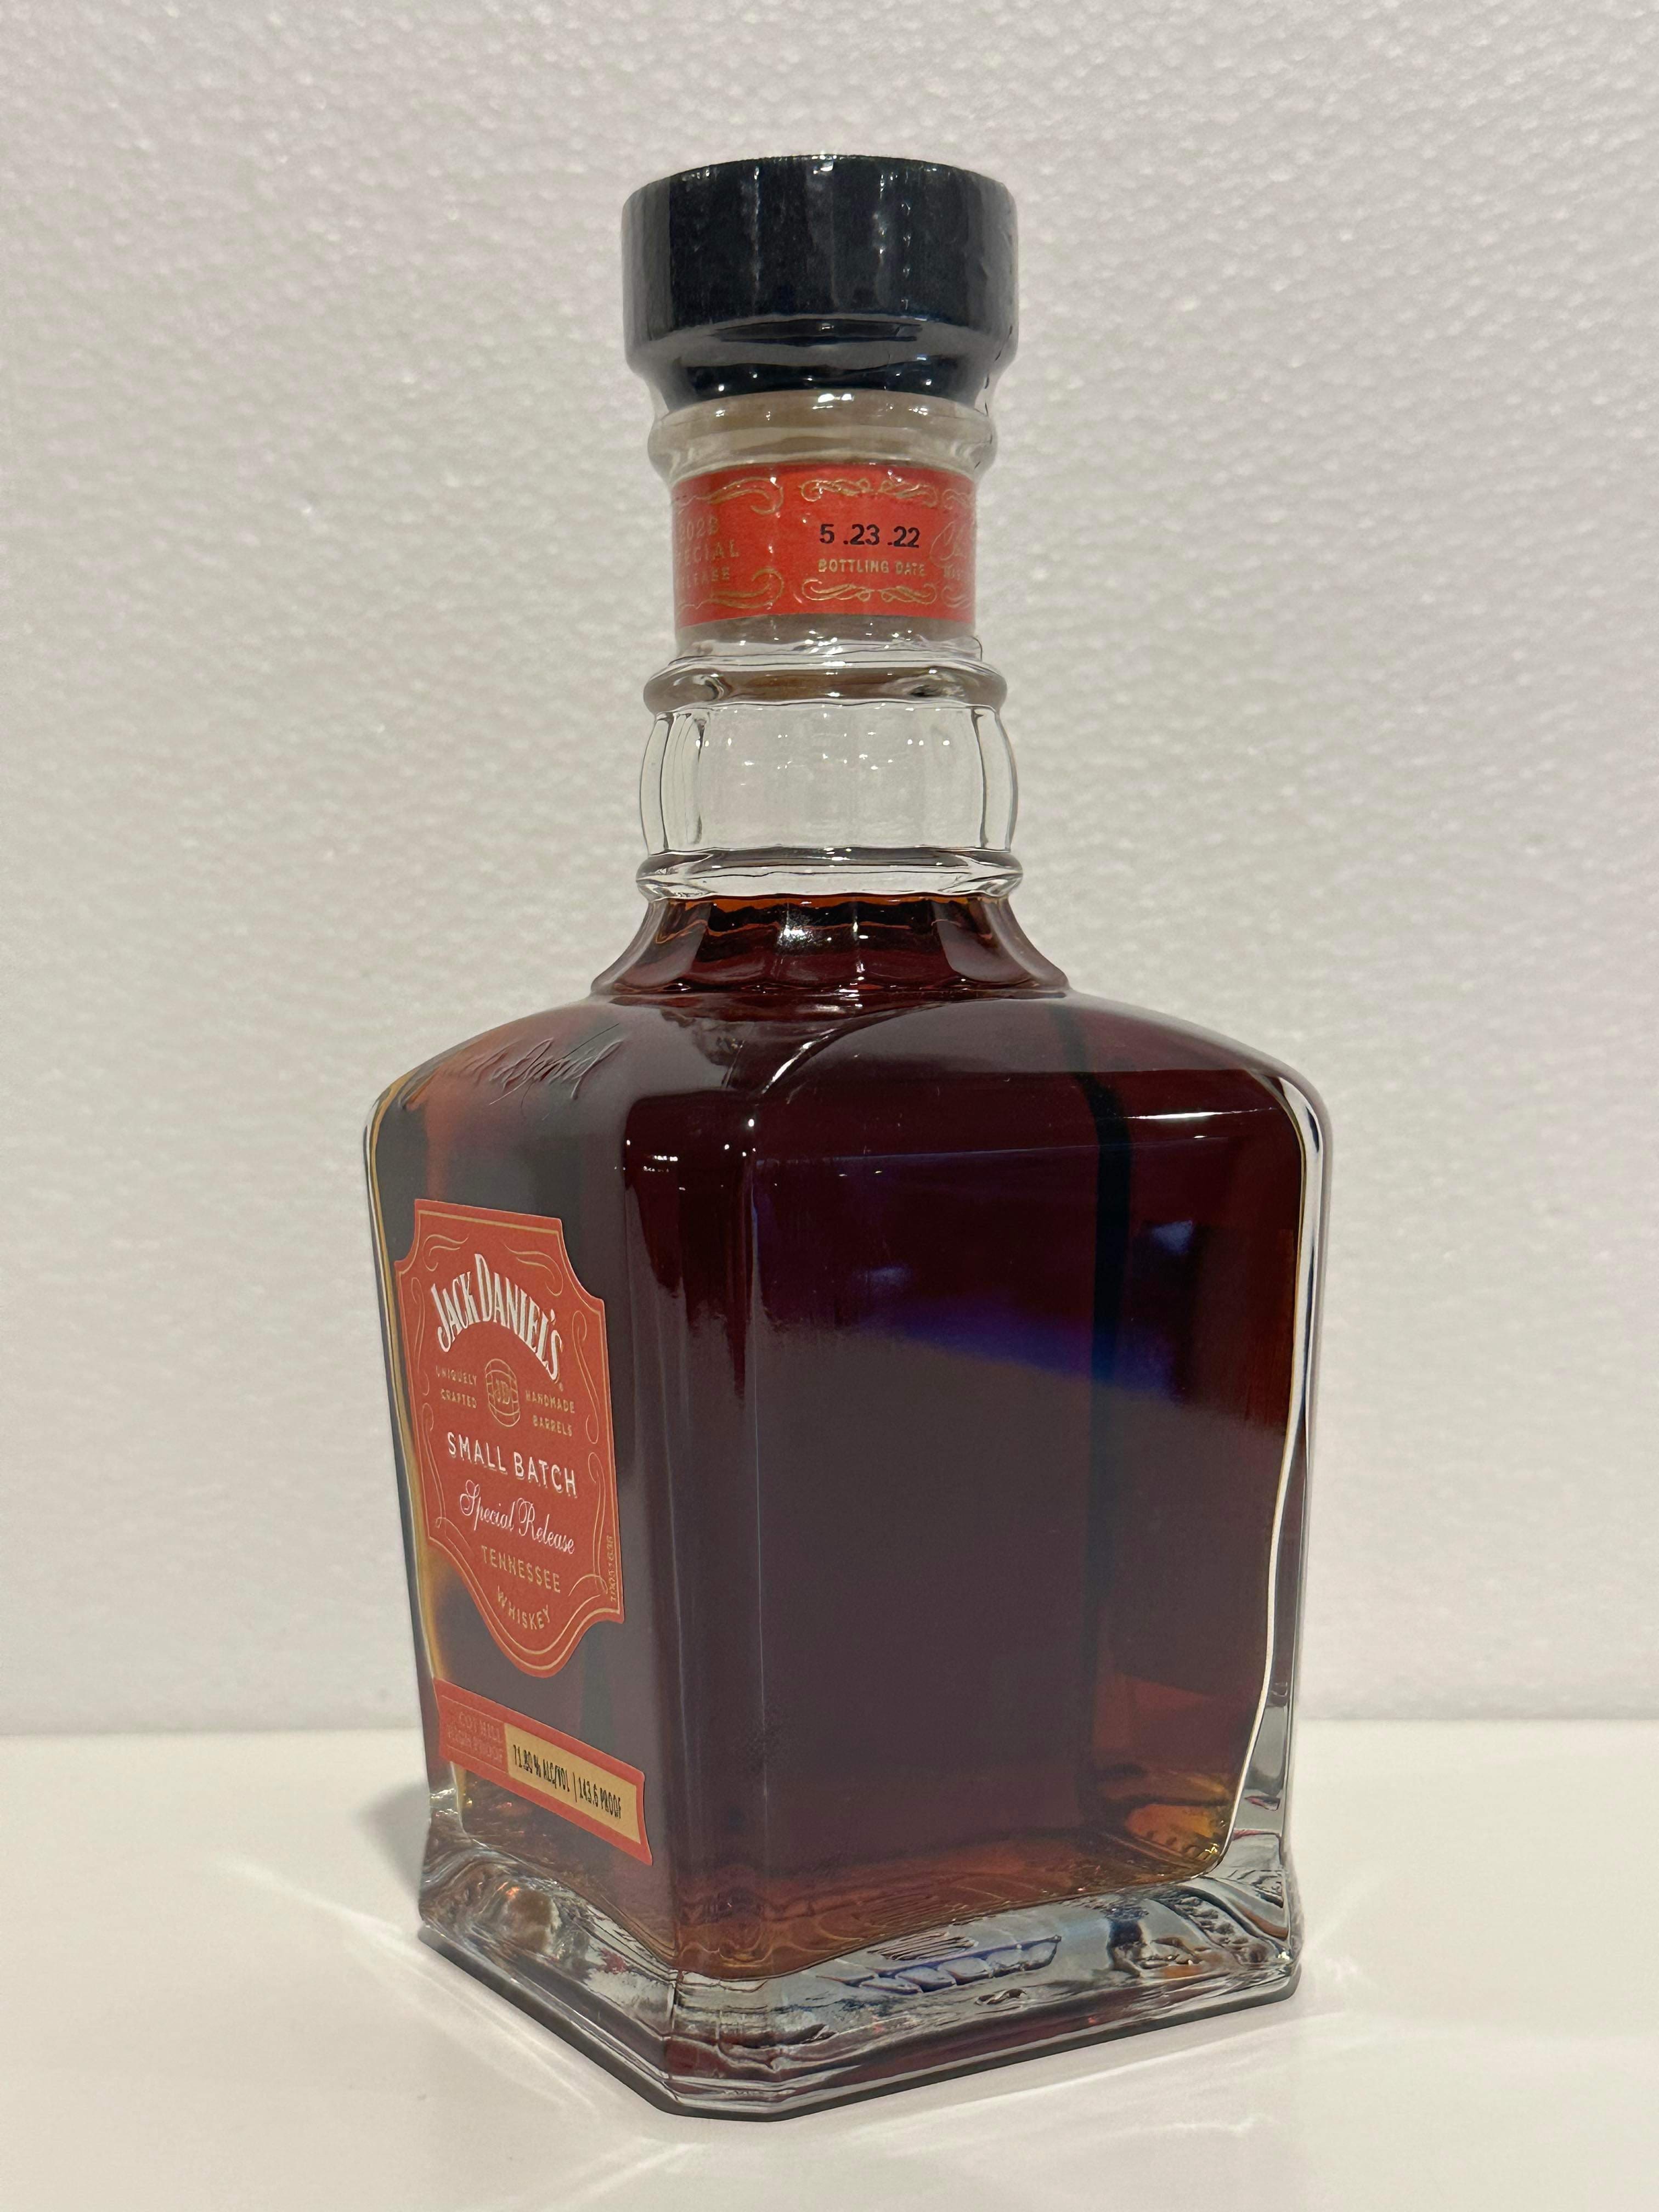 Jack Daniel's Coy Hill High Proof Small Batch Special Reserve 71.8% ABV (143.6 Proof) 375ml